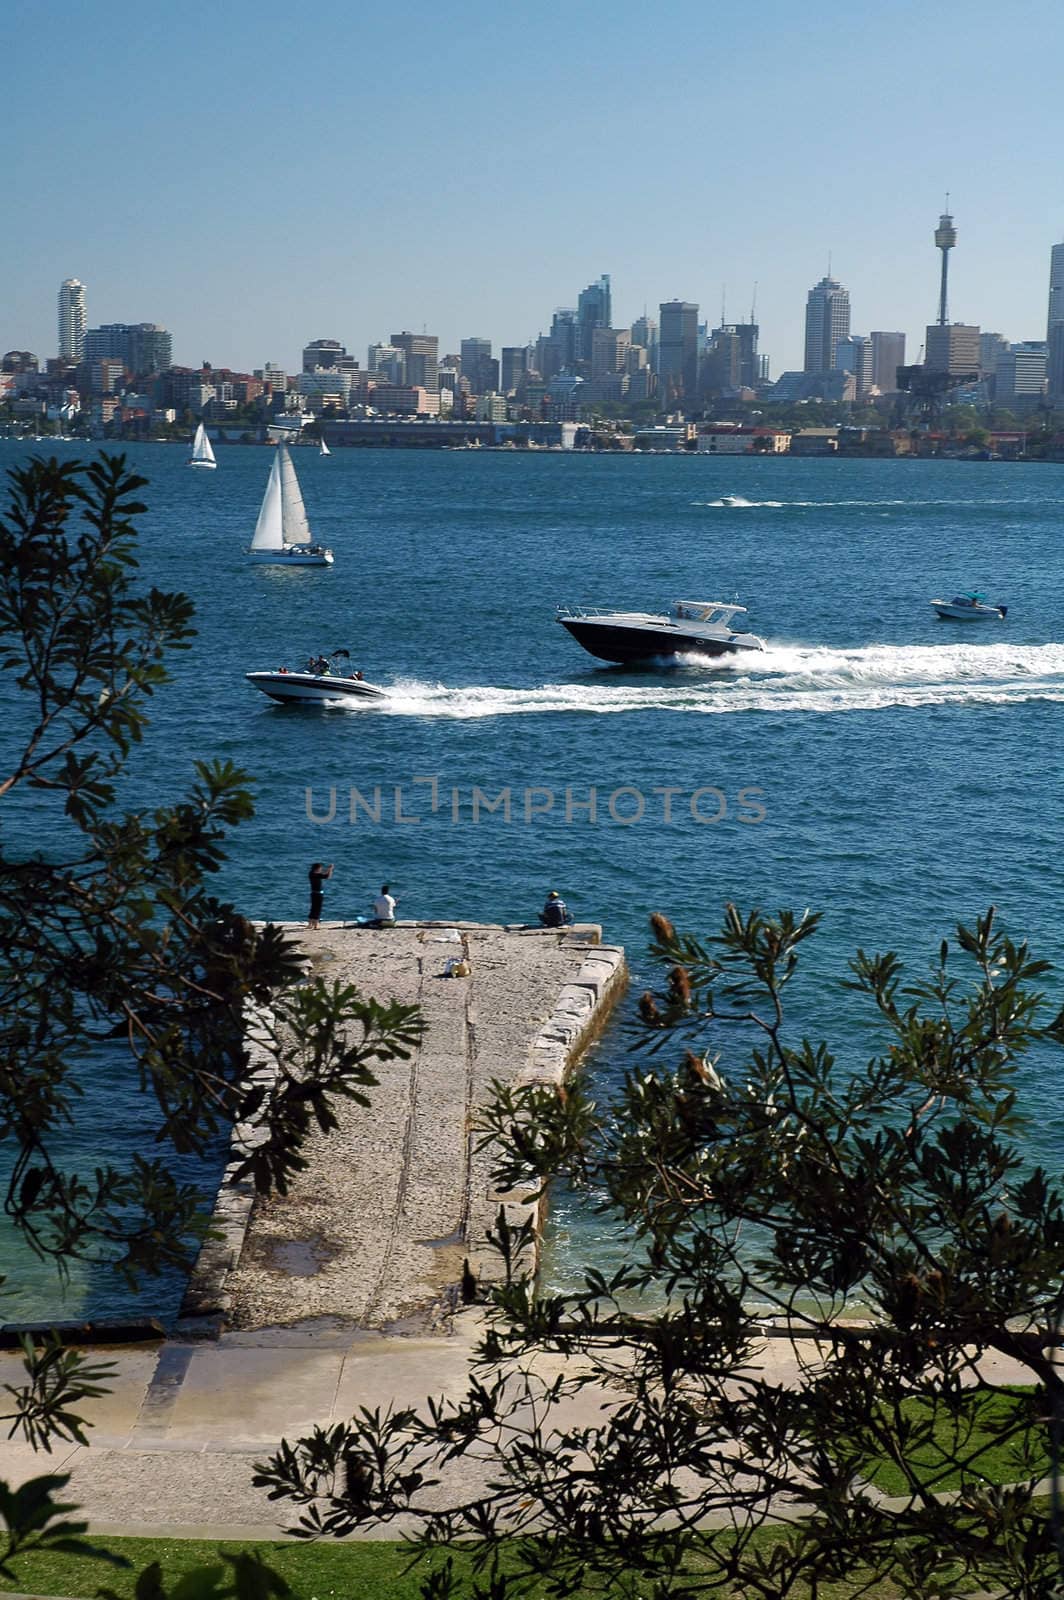 Sydney scenery, speedboats and yachts in front of CBD, Sydney tower in background